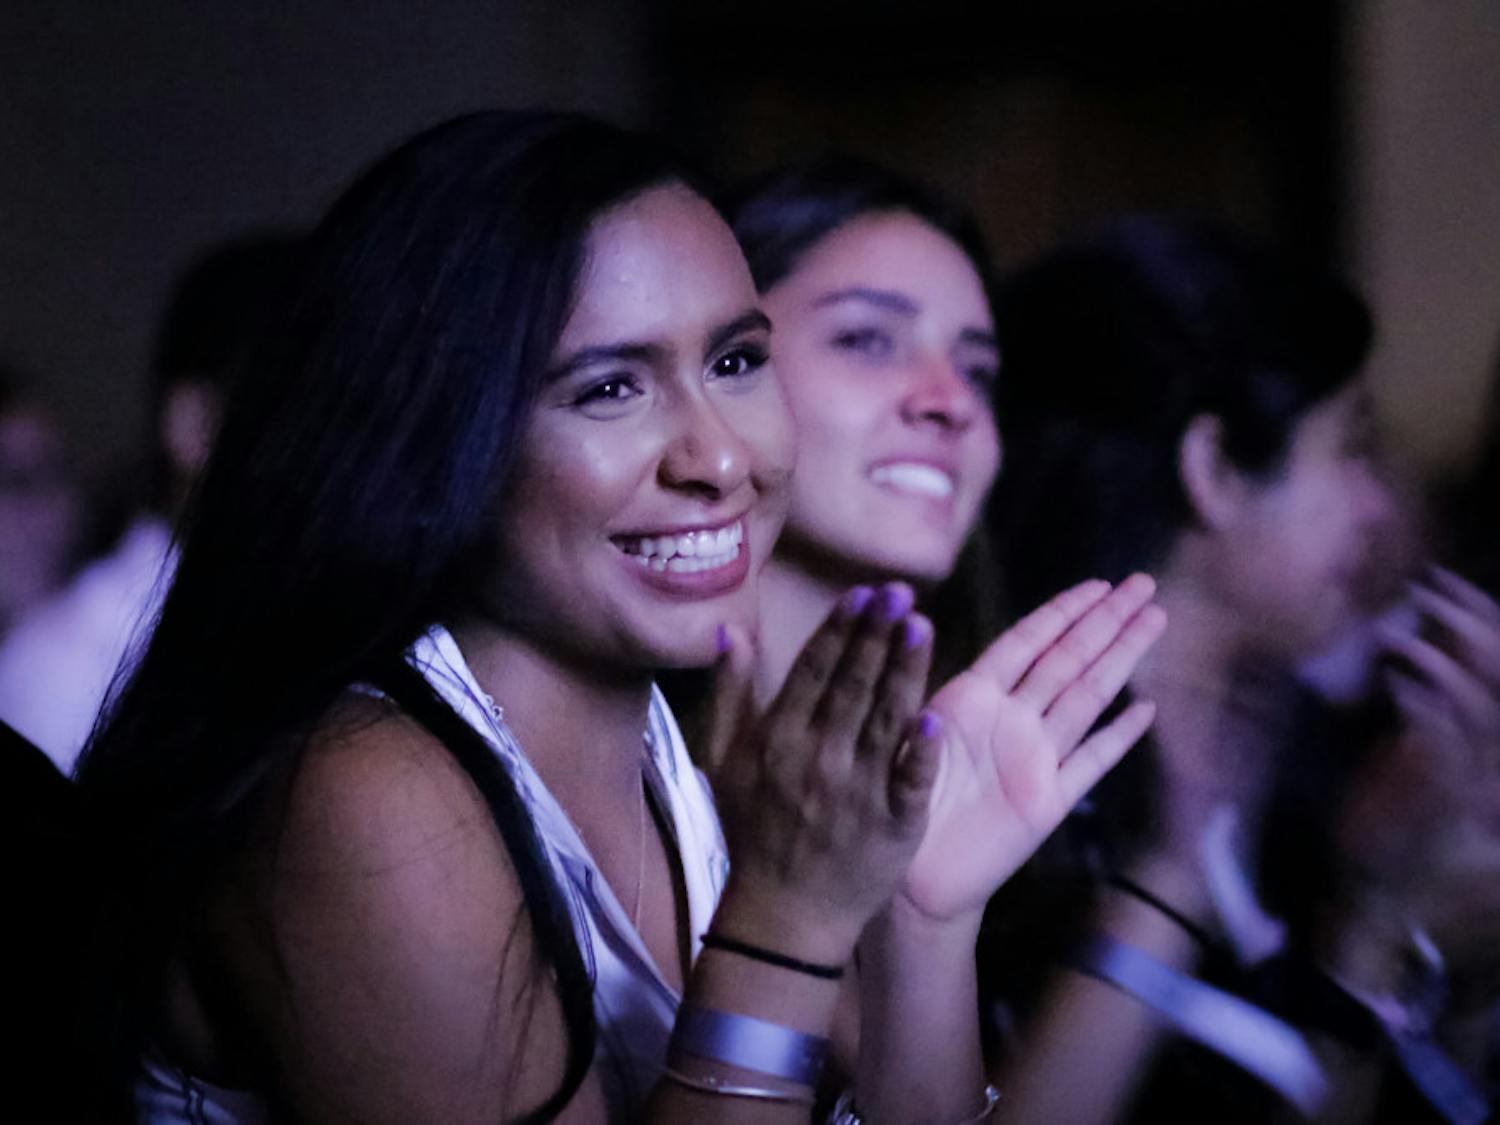 Alexia Yau, a 19-year-old UF natural resource conservation junior, cheers as Julissa Calderon, a Buzzfeed video producer and the keynote speaker at the UF Hispanic-Latinx Student Assembly, concludes her presentation.